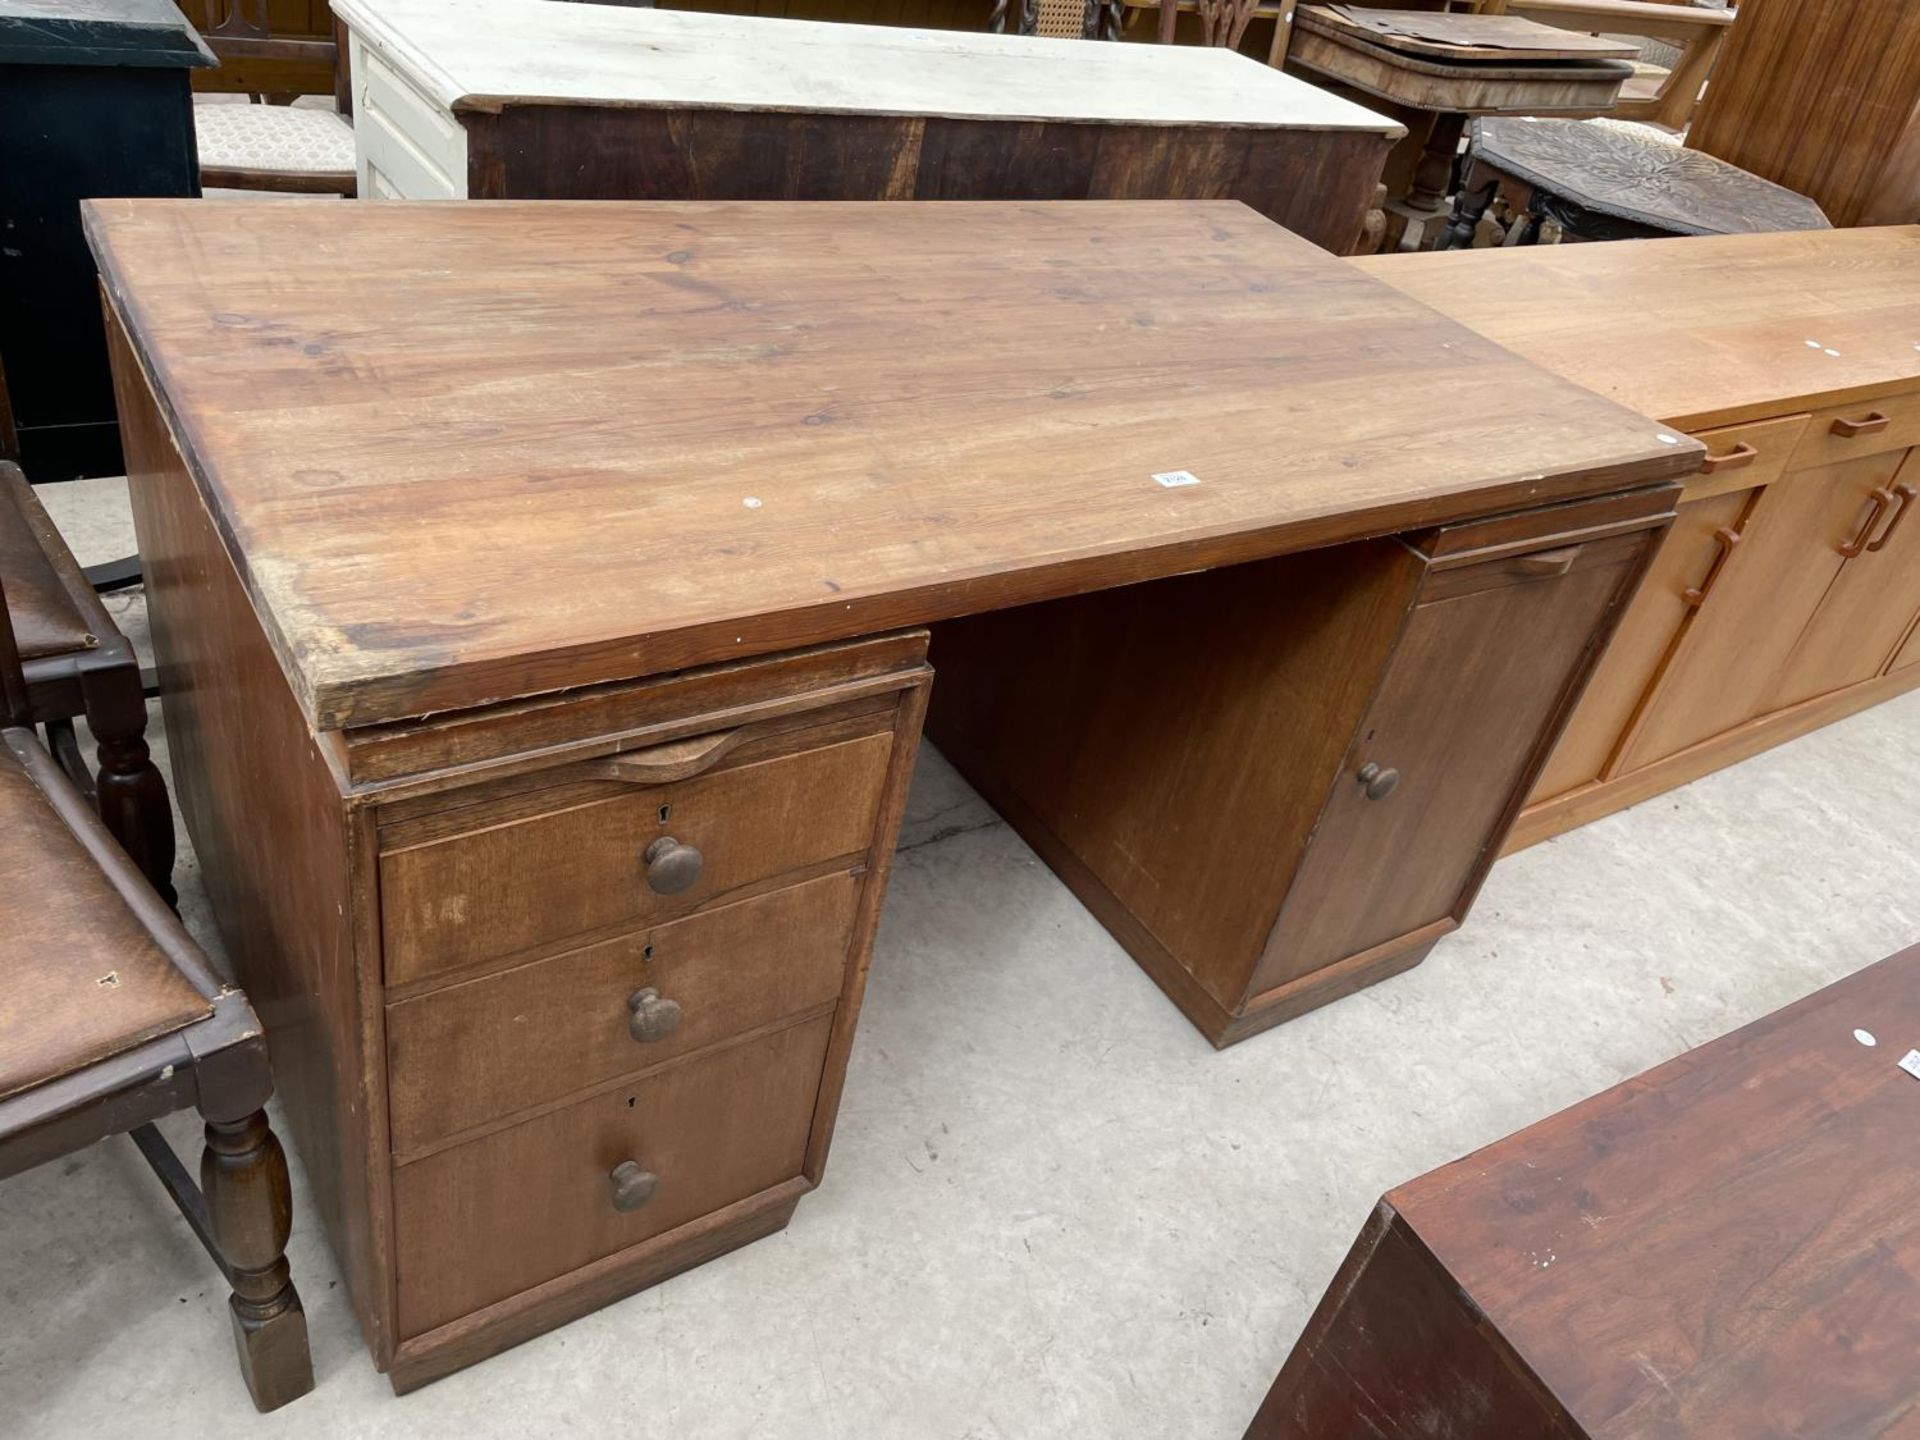 A MID 20TH CENTURY TWIN PEDESTAL DESK ENCLOSING DRAWERS AND SLIDES WITH PINE TOP, 54X29.5"